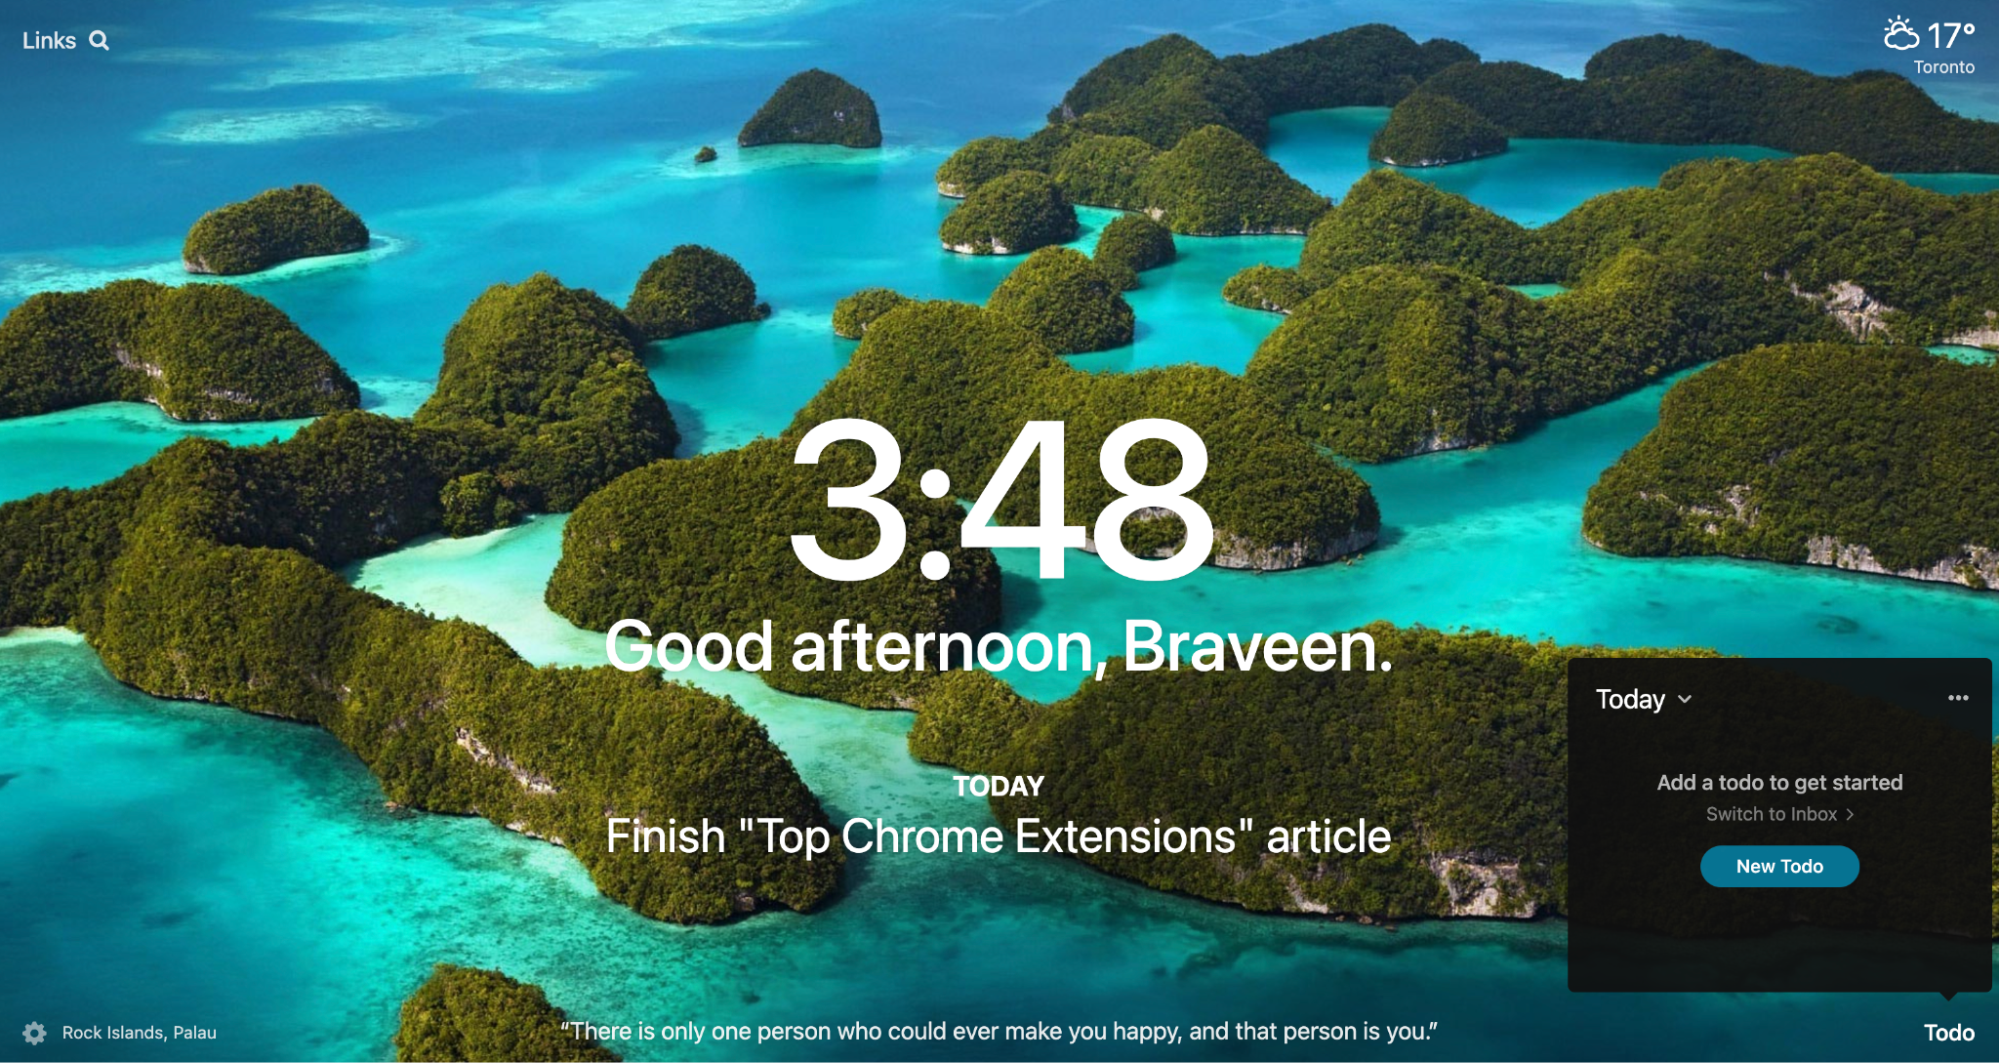 Browser tab with tropical island wallpaper, time, greeting, and task list.